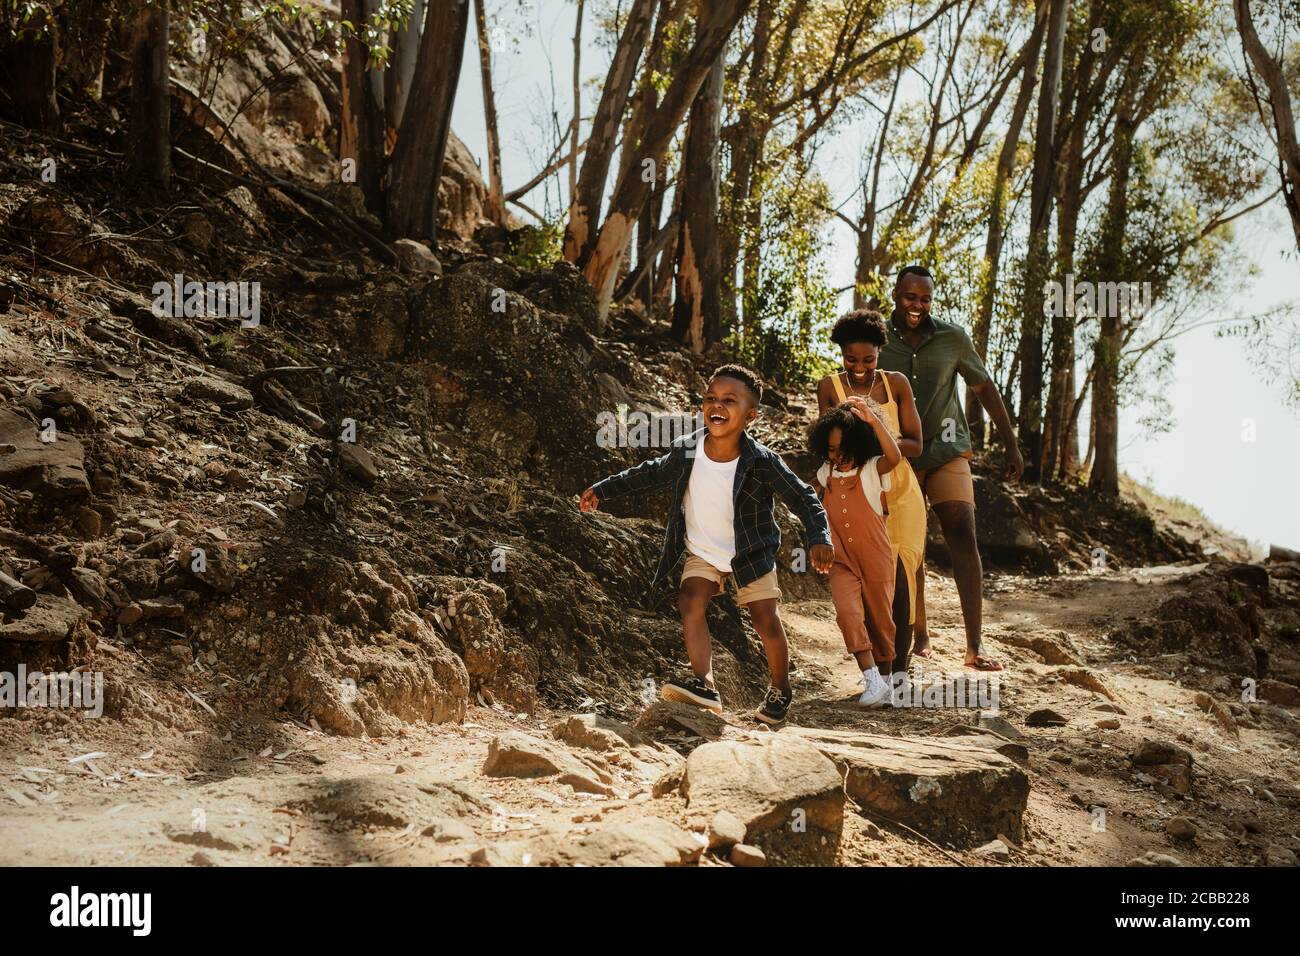 Young family running down rocky mountain trail. Two kids running with parent on a trail in forest. Stock Photo